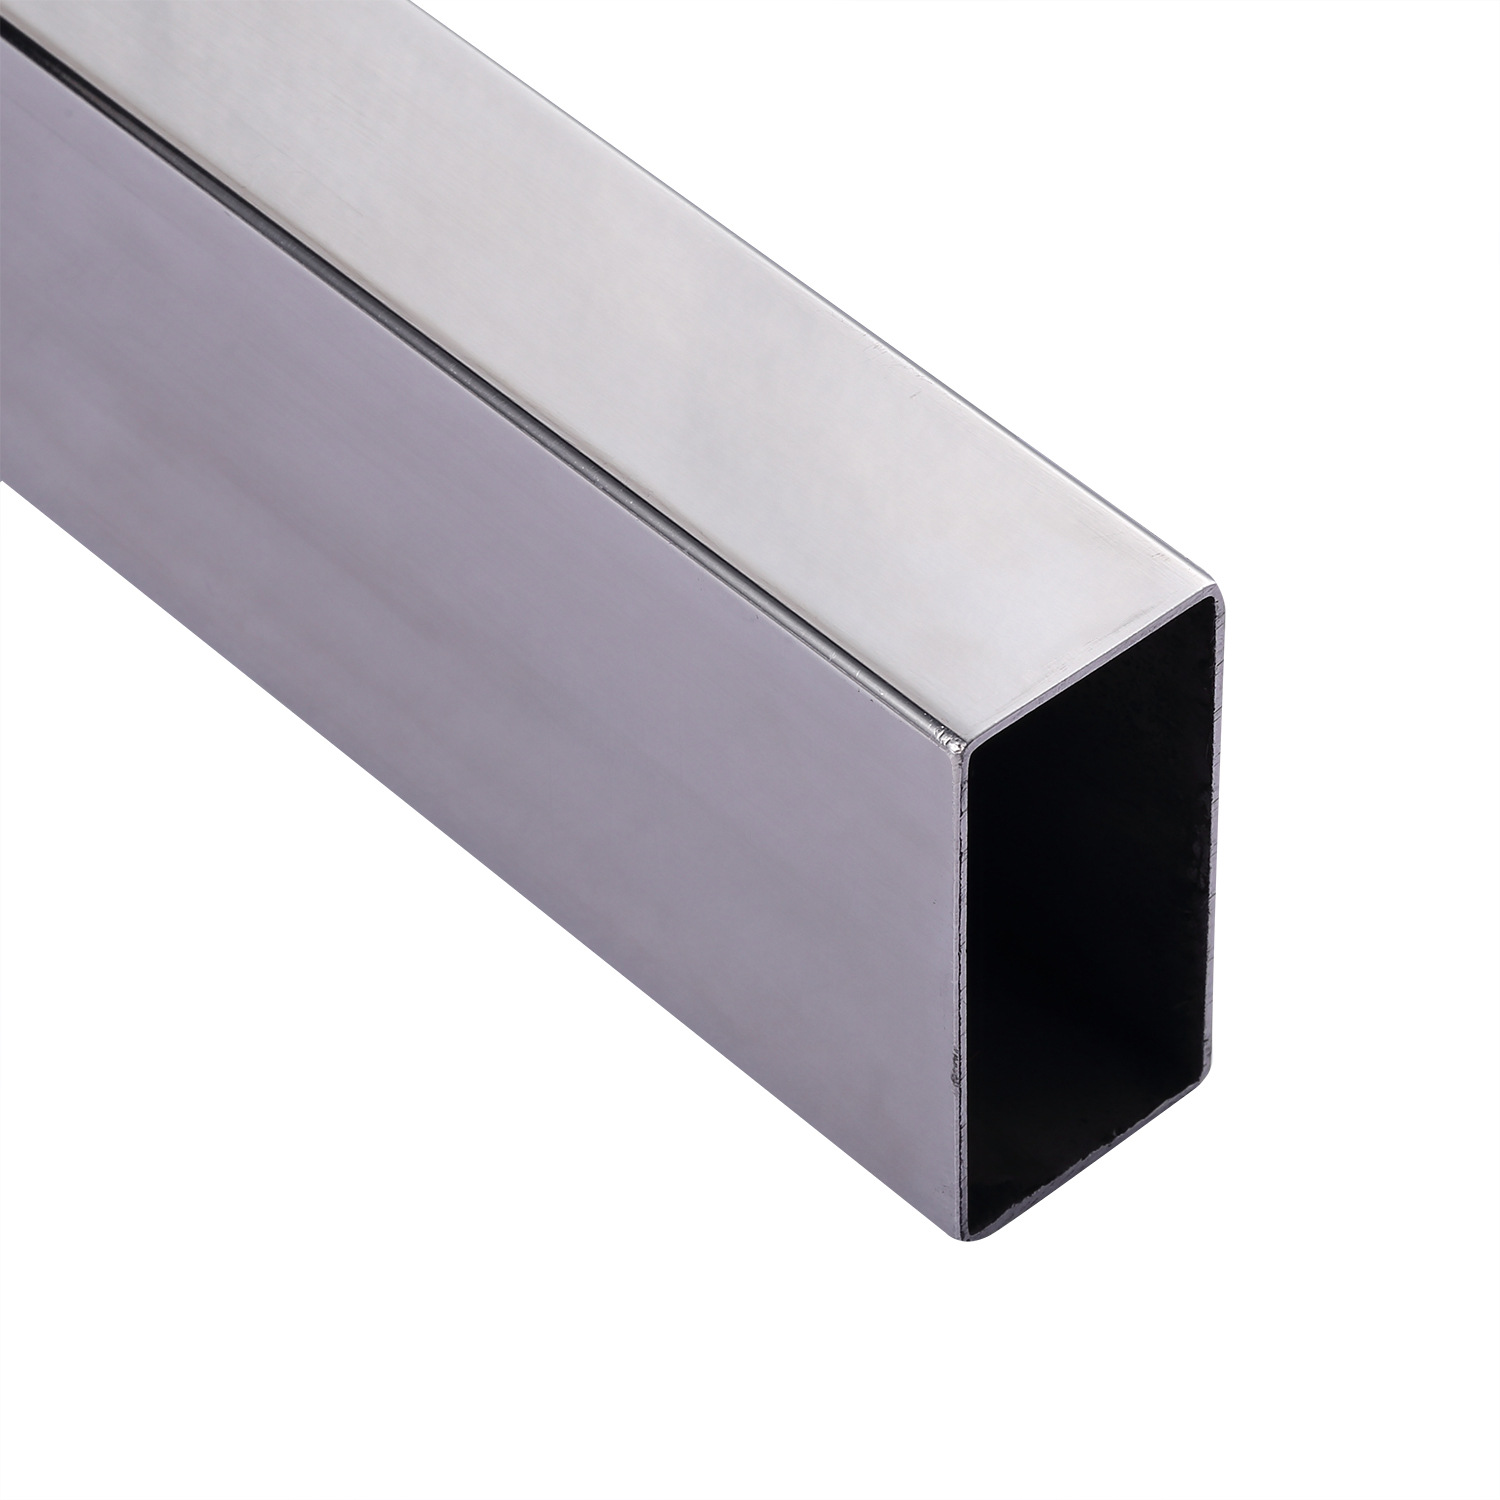 Stainless Steel Rectangular Tube 40*80*3.0mm 50*100*5.0 100*150*5.0mm Can Be Customized